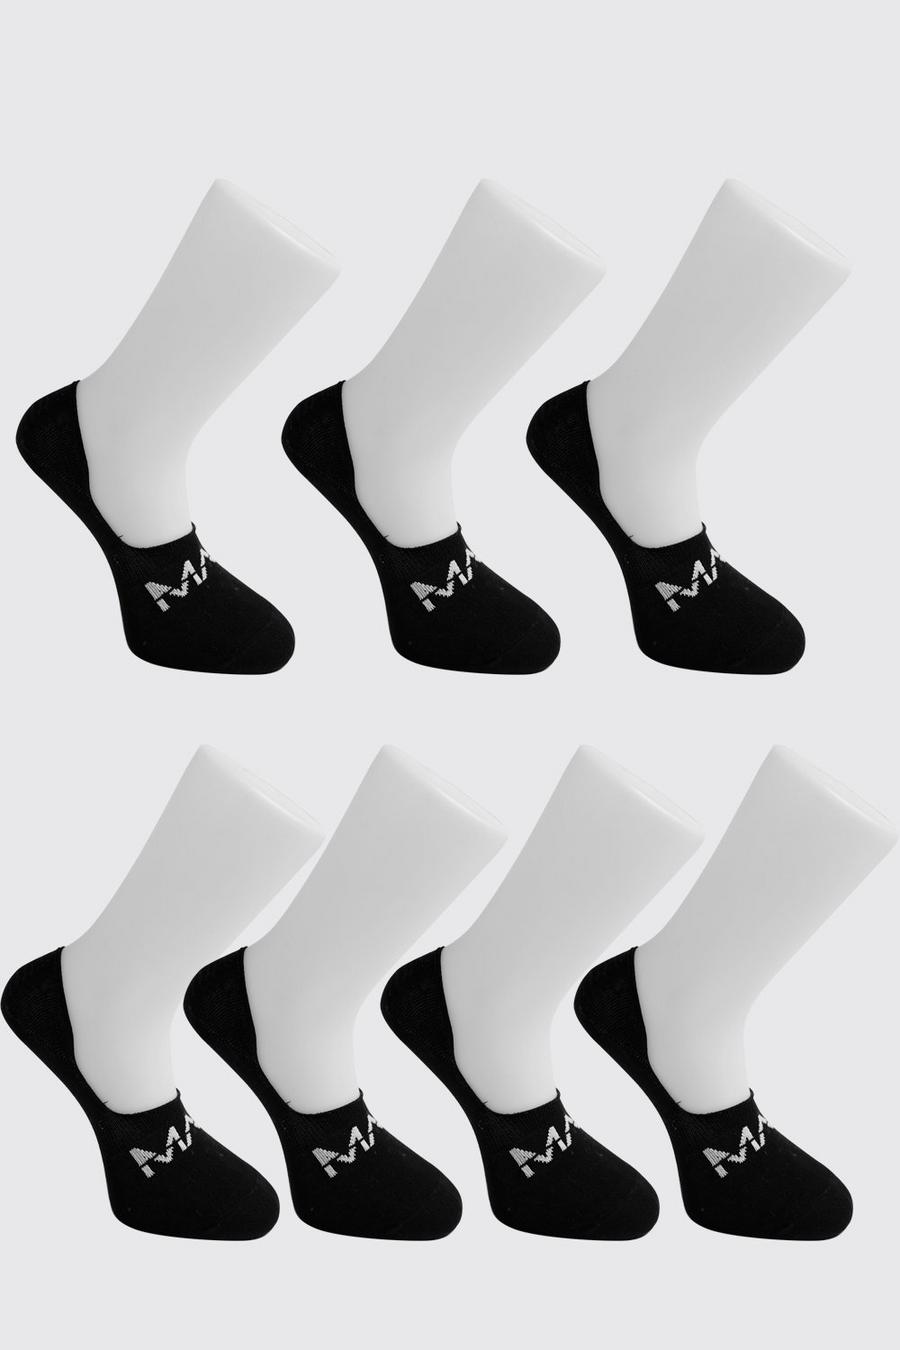 Pack de 7 calcetines invisibles con letras MAN, Negro image number 1